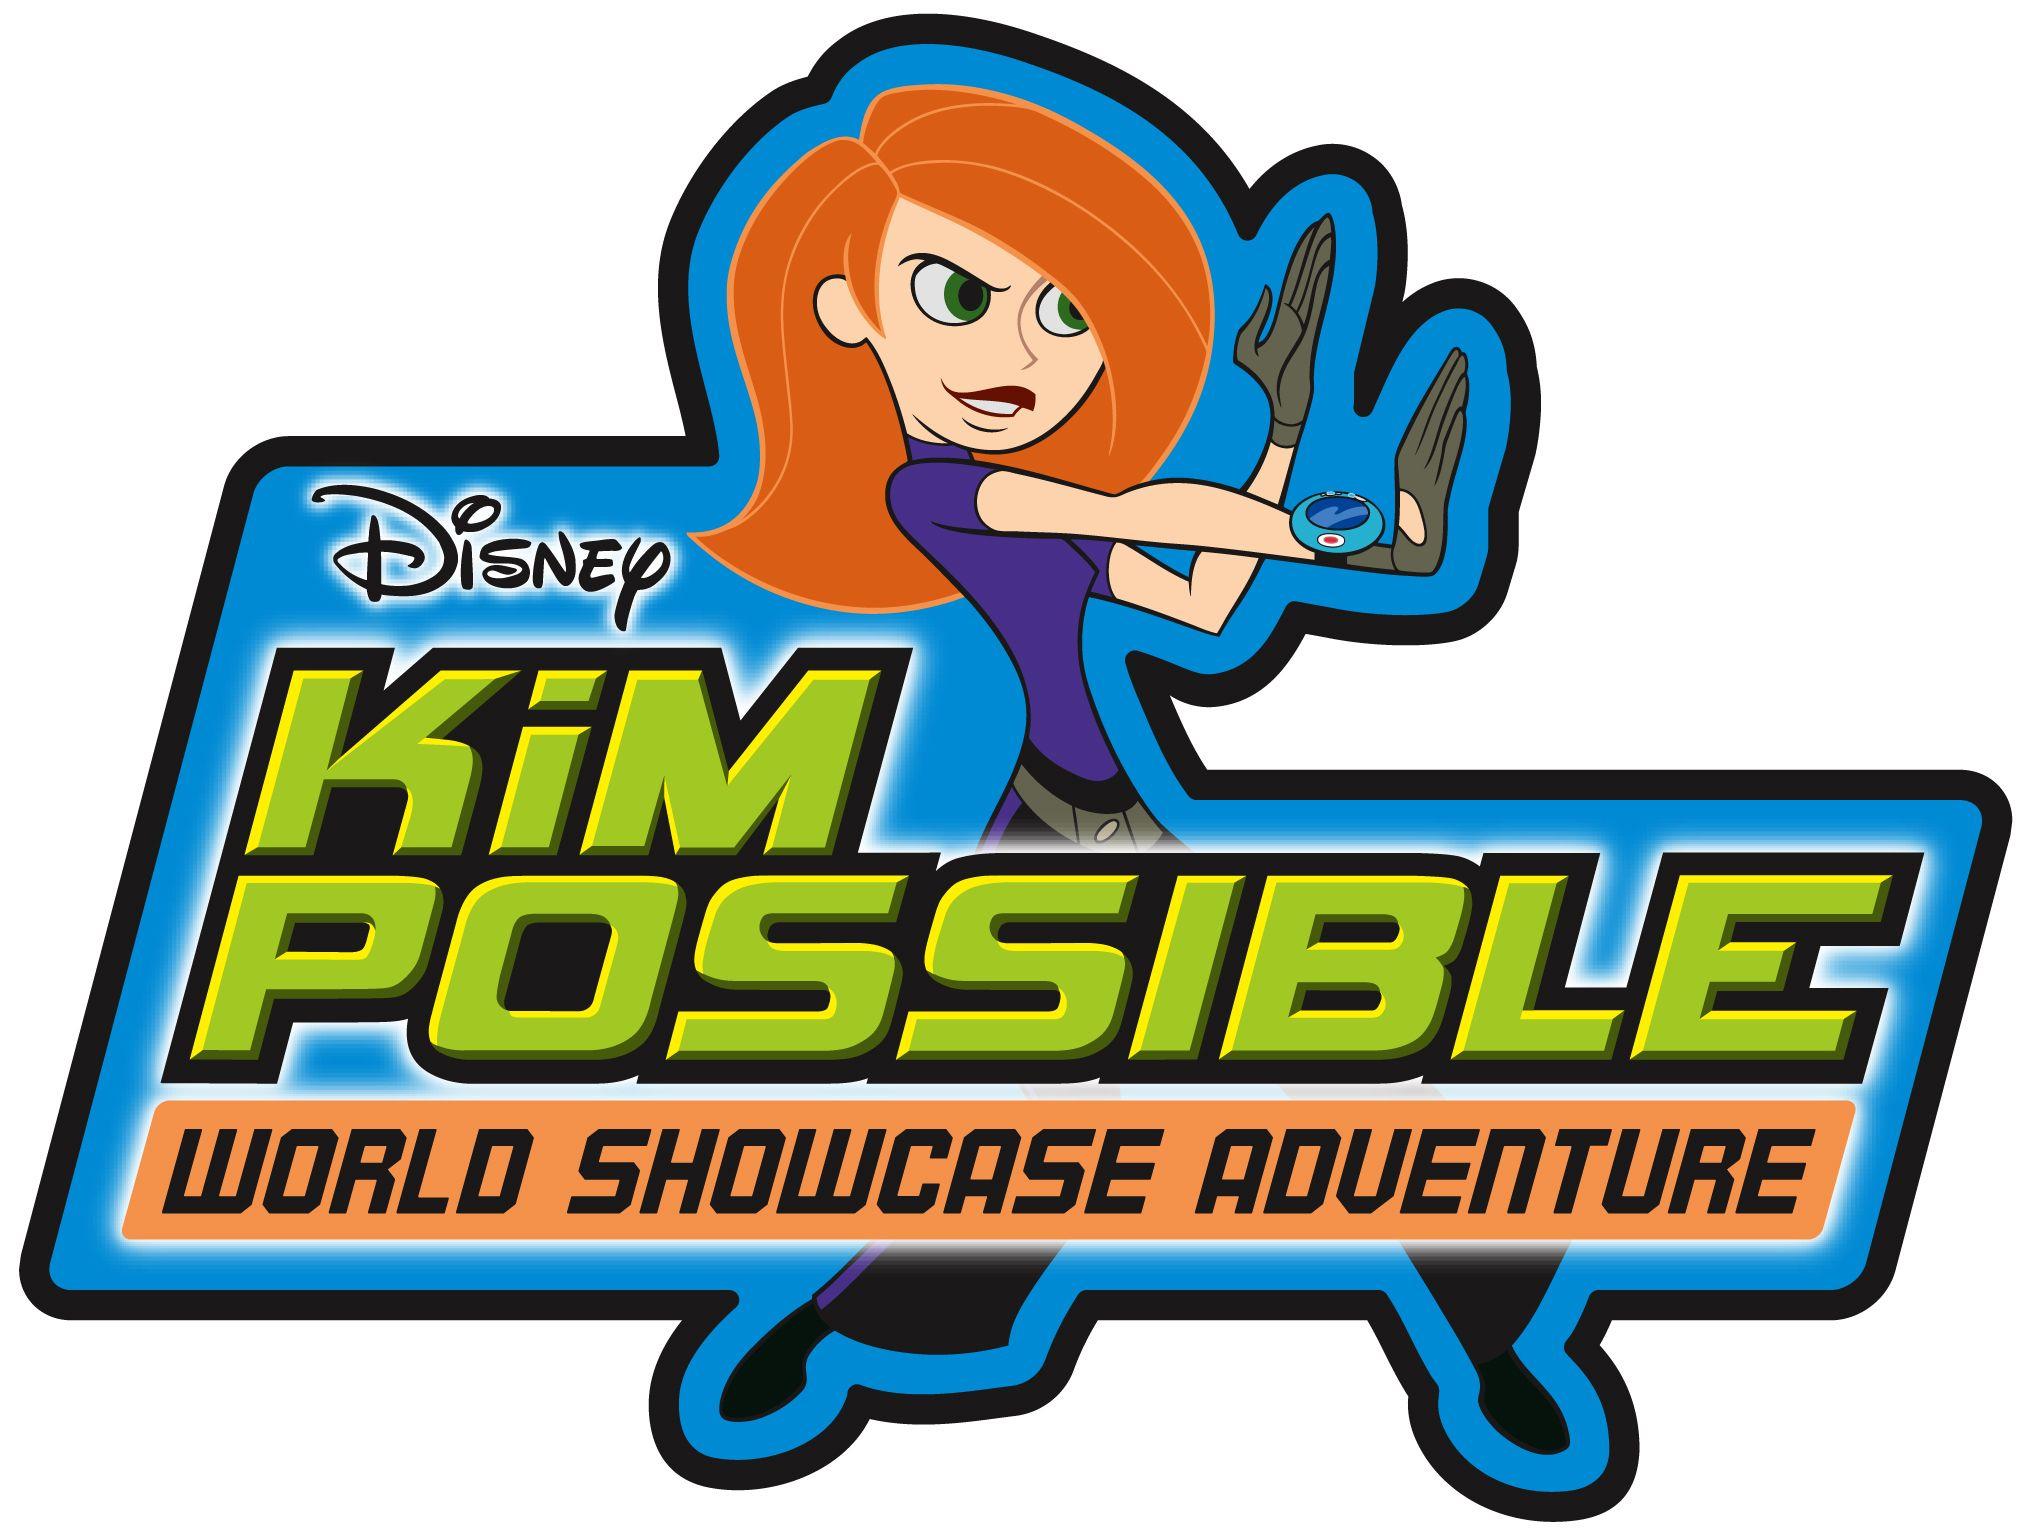 kim possible high quality picture, kim possible high quality image